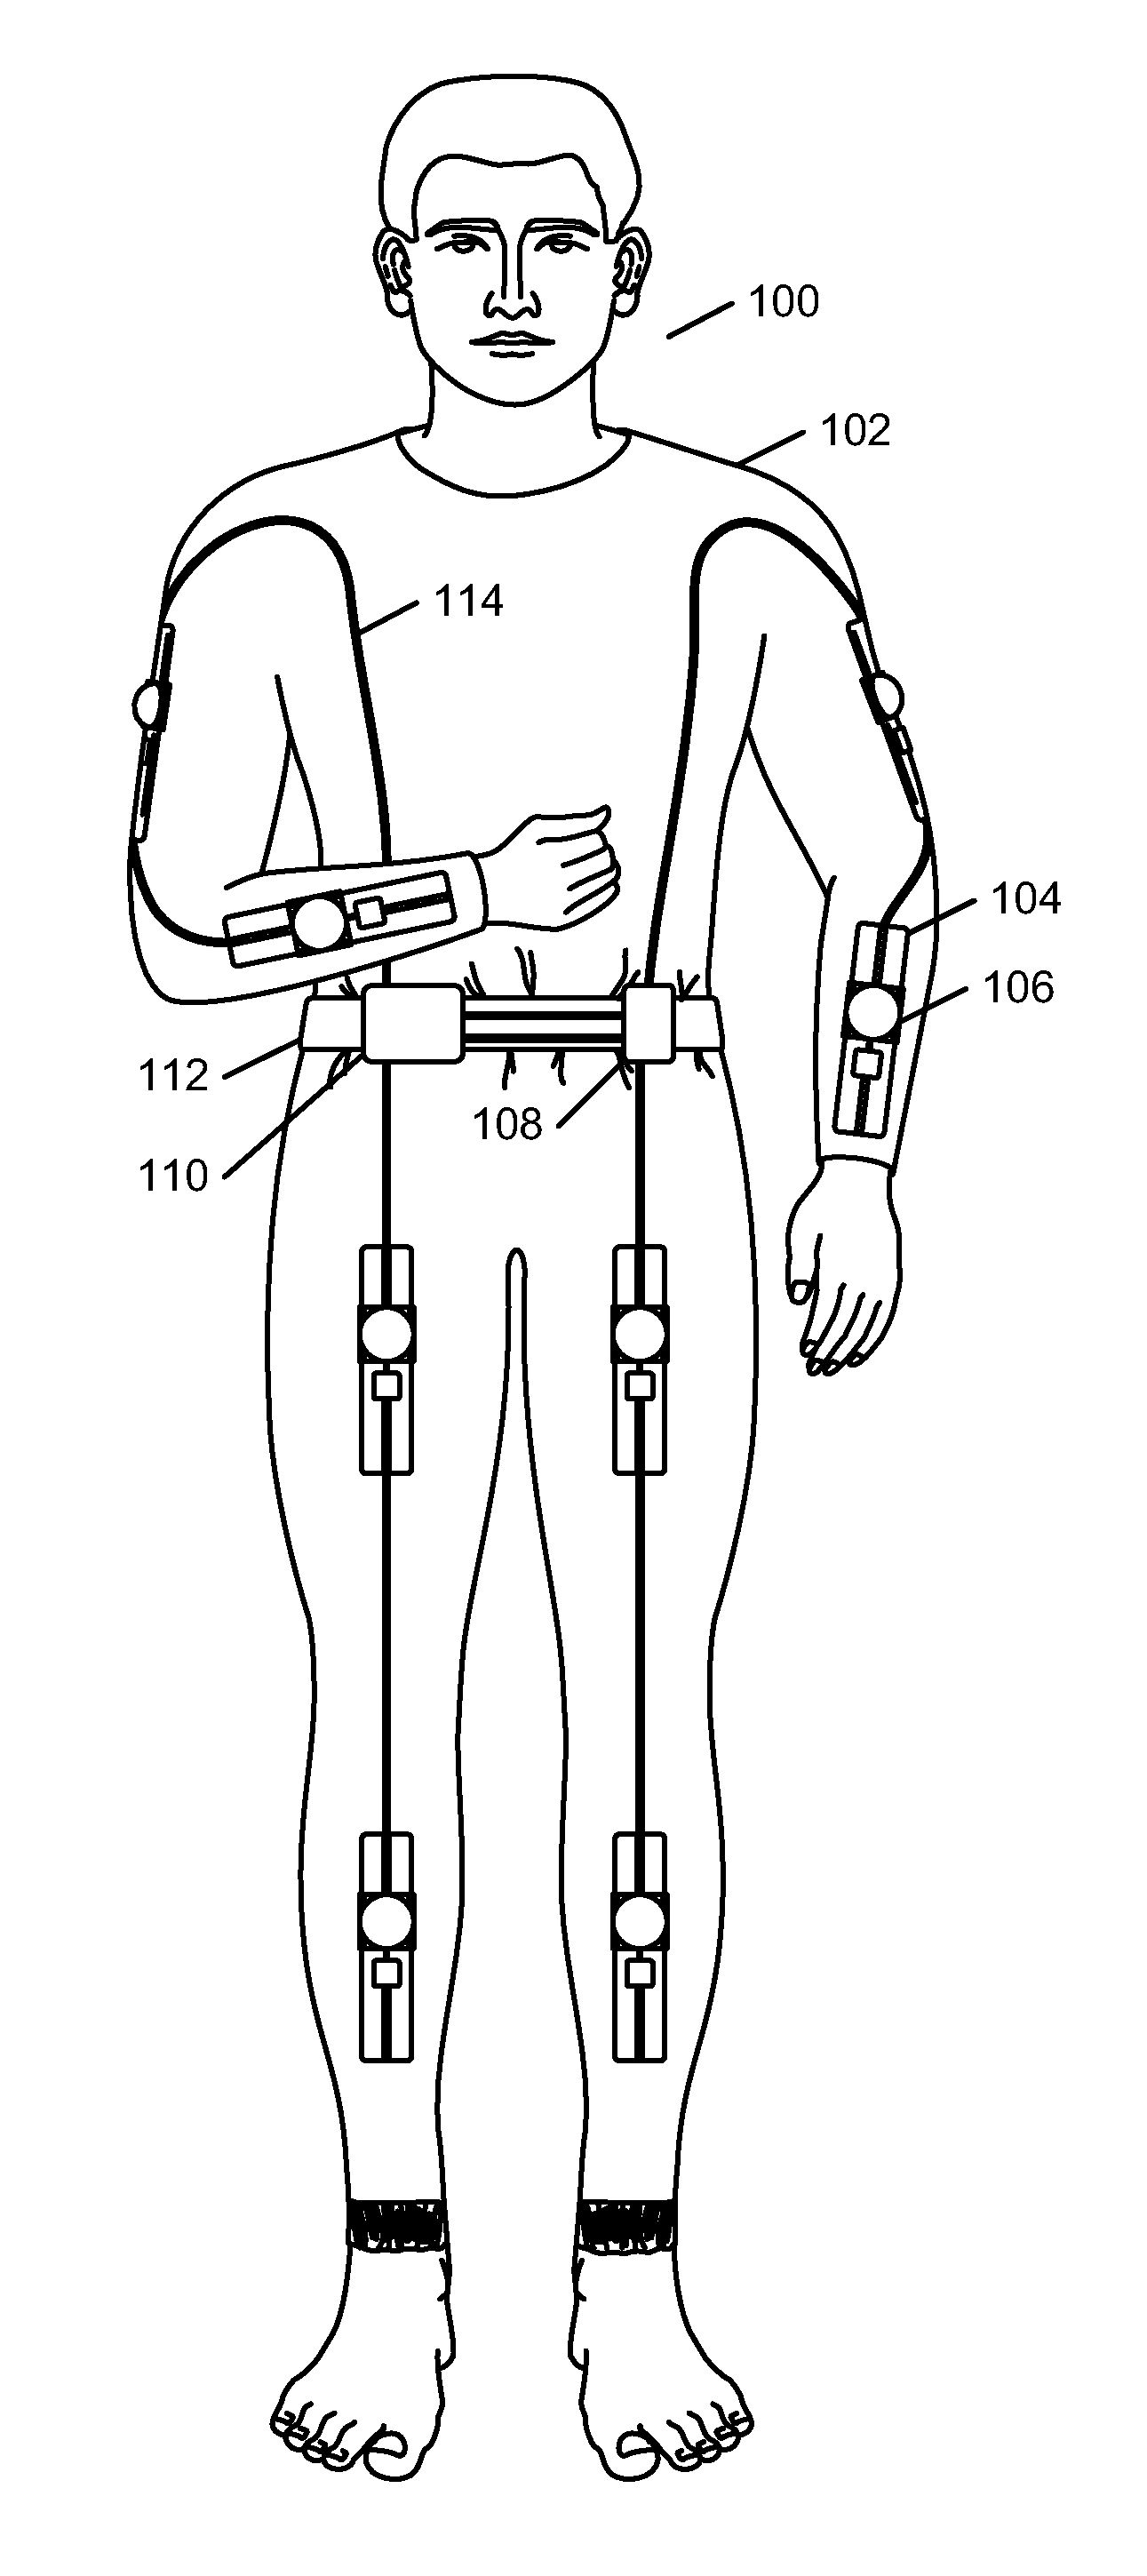 Exoskeleton suit for adaptive resistance to movement